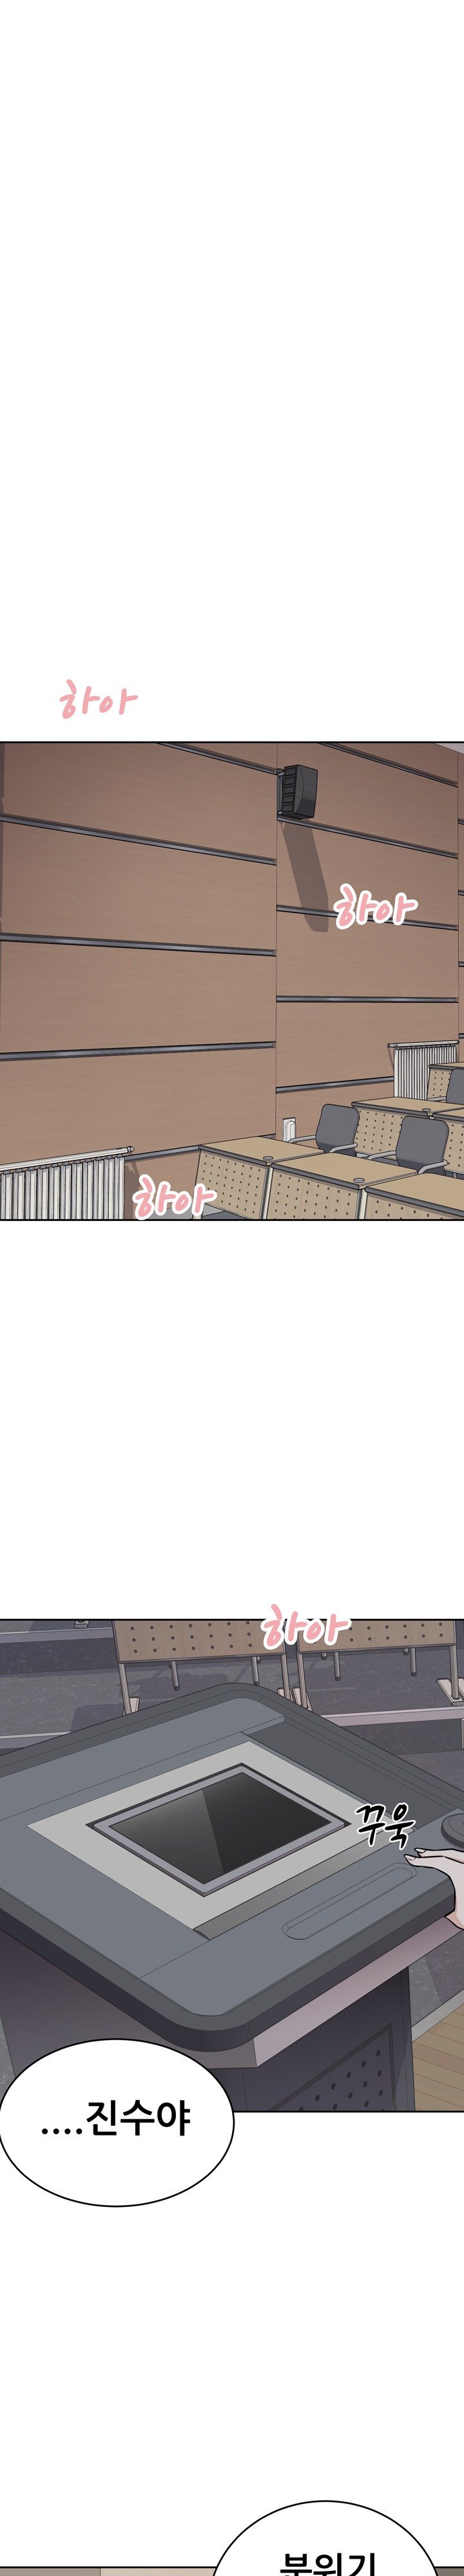 the-ark-is-me-raw-chap-38-21